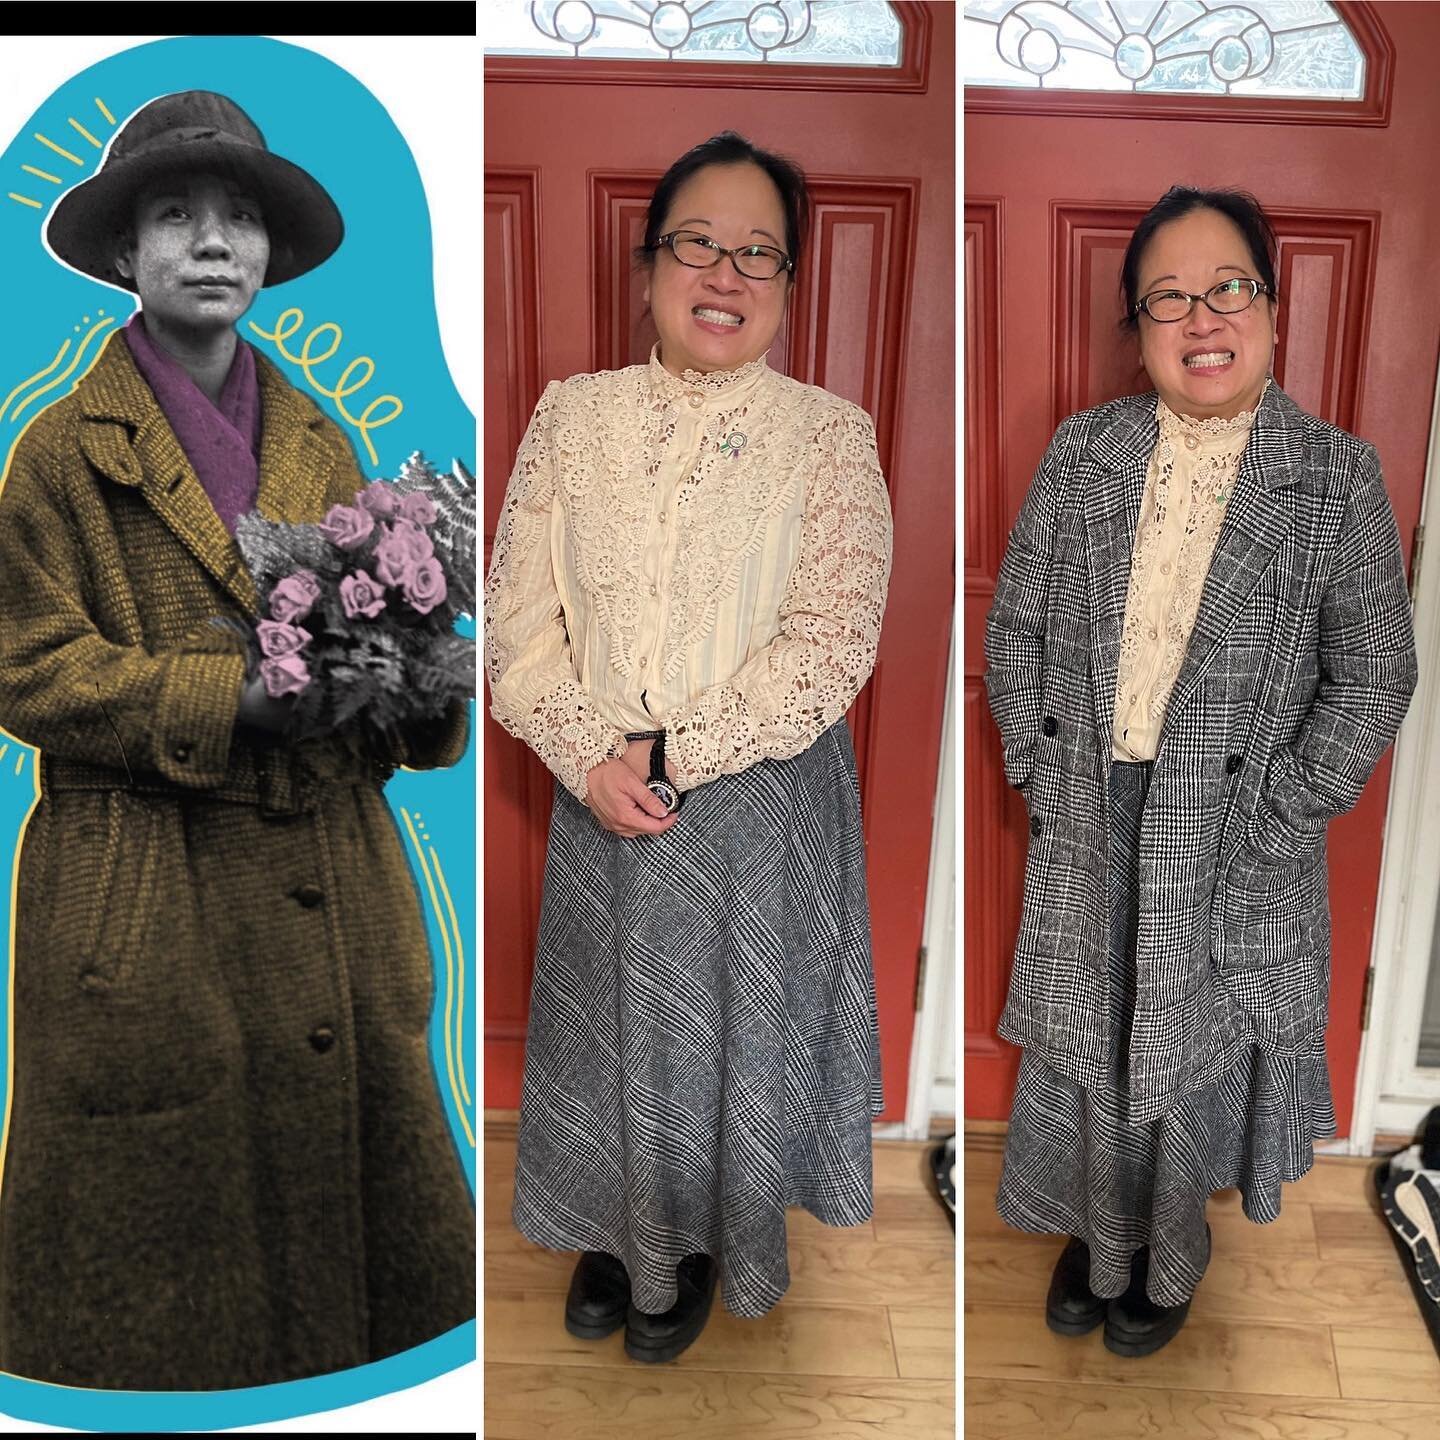 Happy International Women&rsquo;s Day! It happens to coincide with Women in History day at Little Lion&rsquo;s school. Today I represented Mabel Ping Hua Lee, a lesser known suffragist who happened to be a Chinese American teen activist. 

She led a 